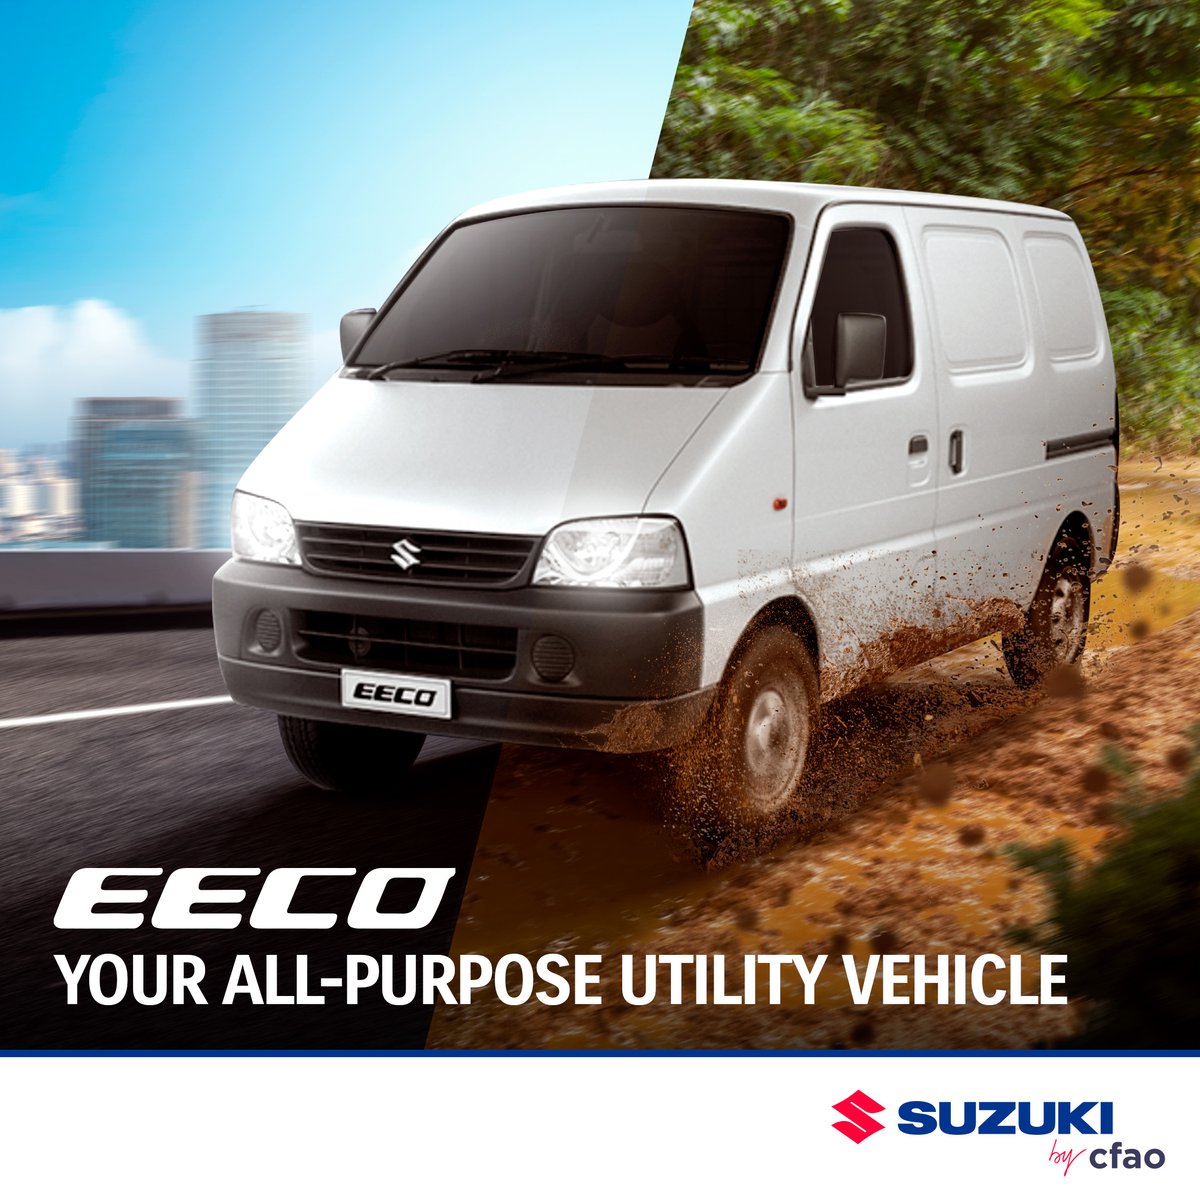 With the EECO, you'll get the most out of your journey in both urban and unpaved areas. In all situations, its agile handling means you can carry your load in complete safety.

#suzukieeco #eecovancargo #cargovan #suzukibycfao